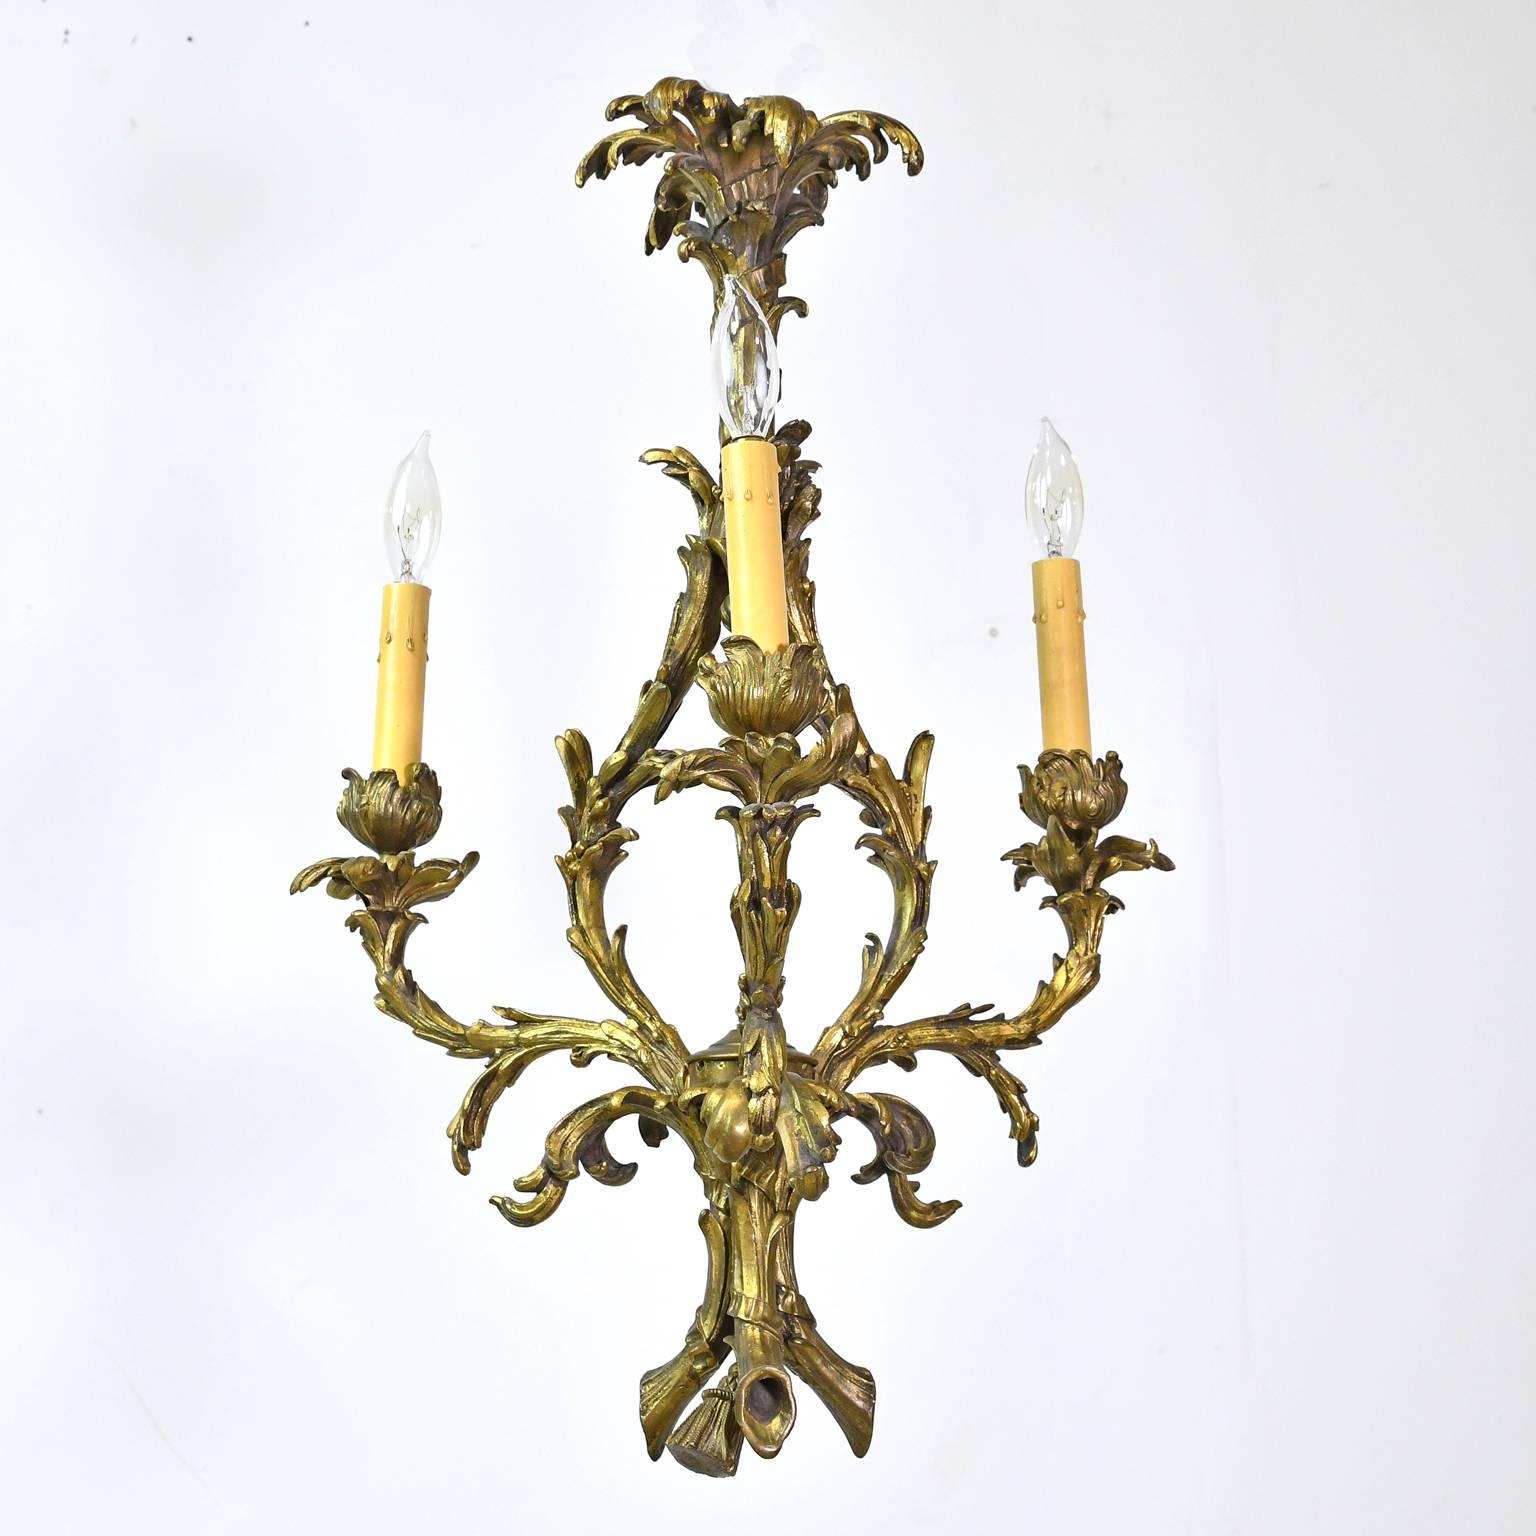 From the Belle Époque, a very lovely and small chandelier in bronze doré with three lights in the French Rococo style of Louis XV. France, circa 1900.
Perfect size for a small foyer, bathroom or powder room!
15 1/4